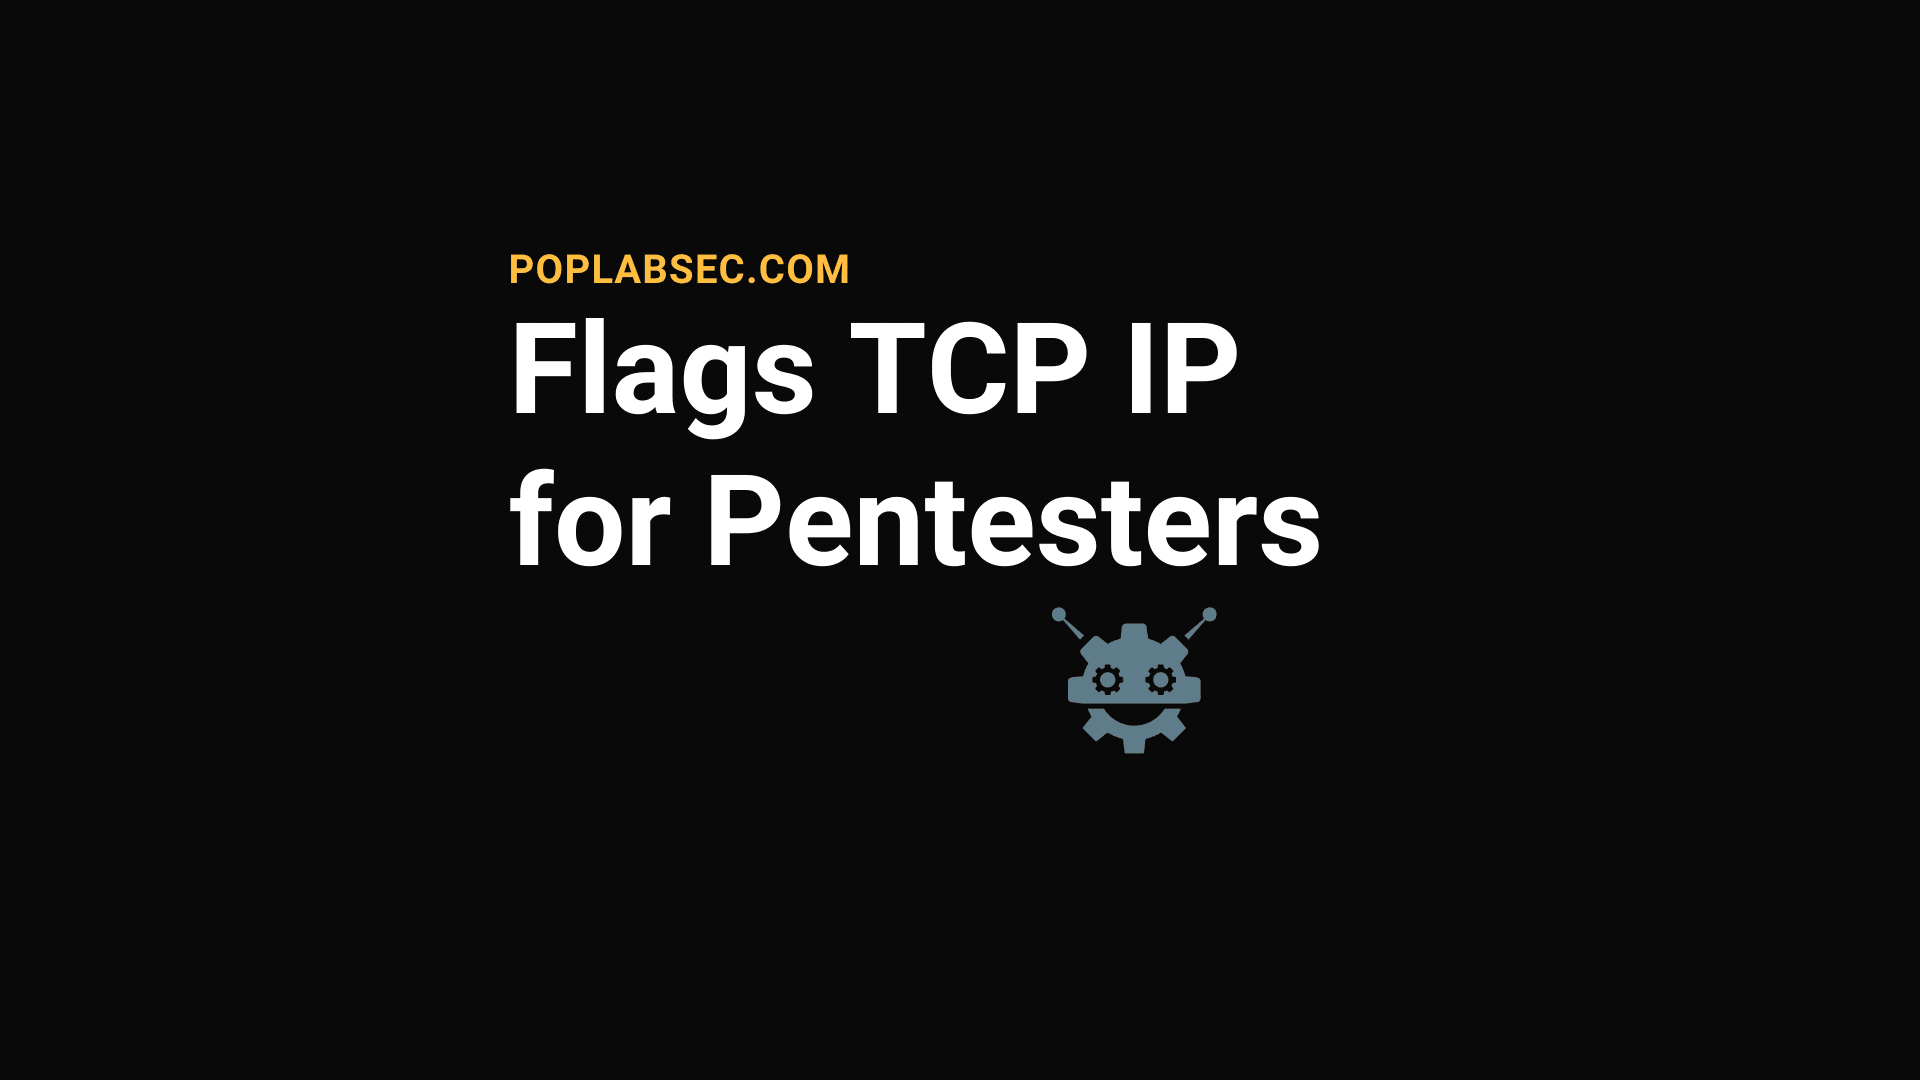 Flags TCP IP for Pentesters